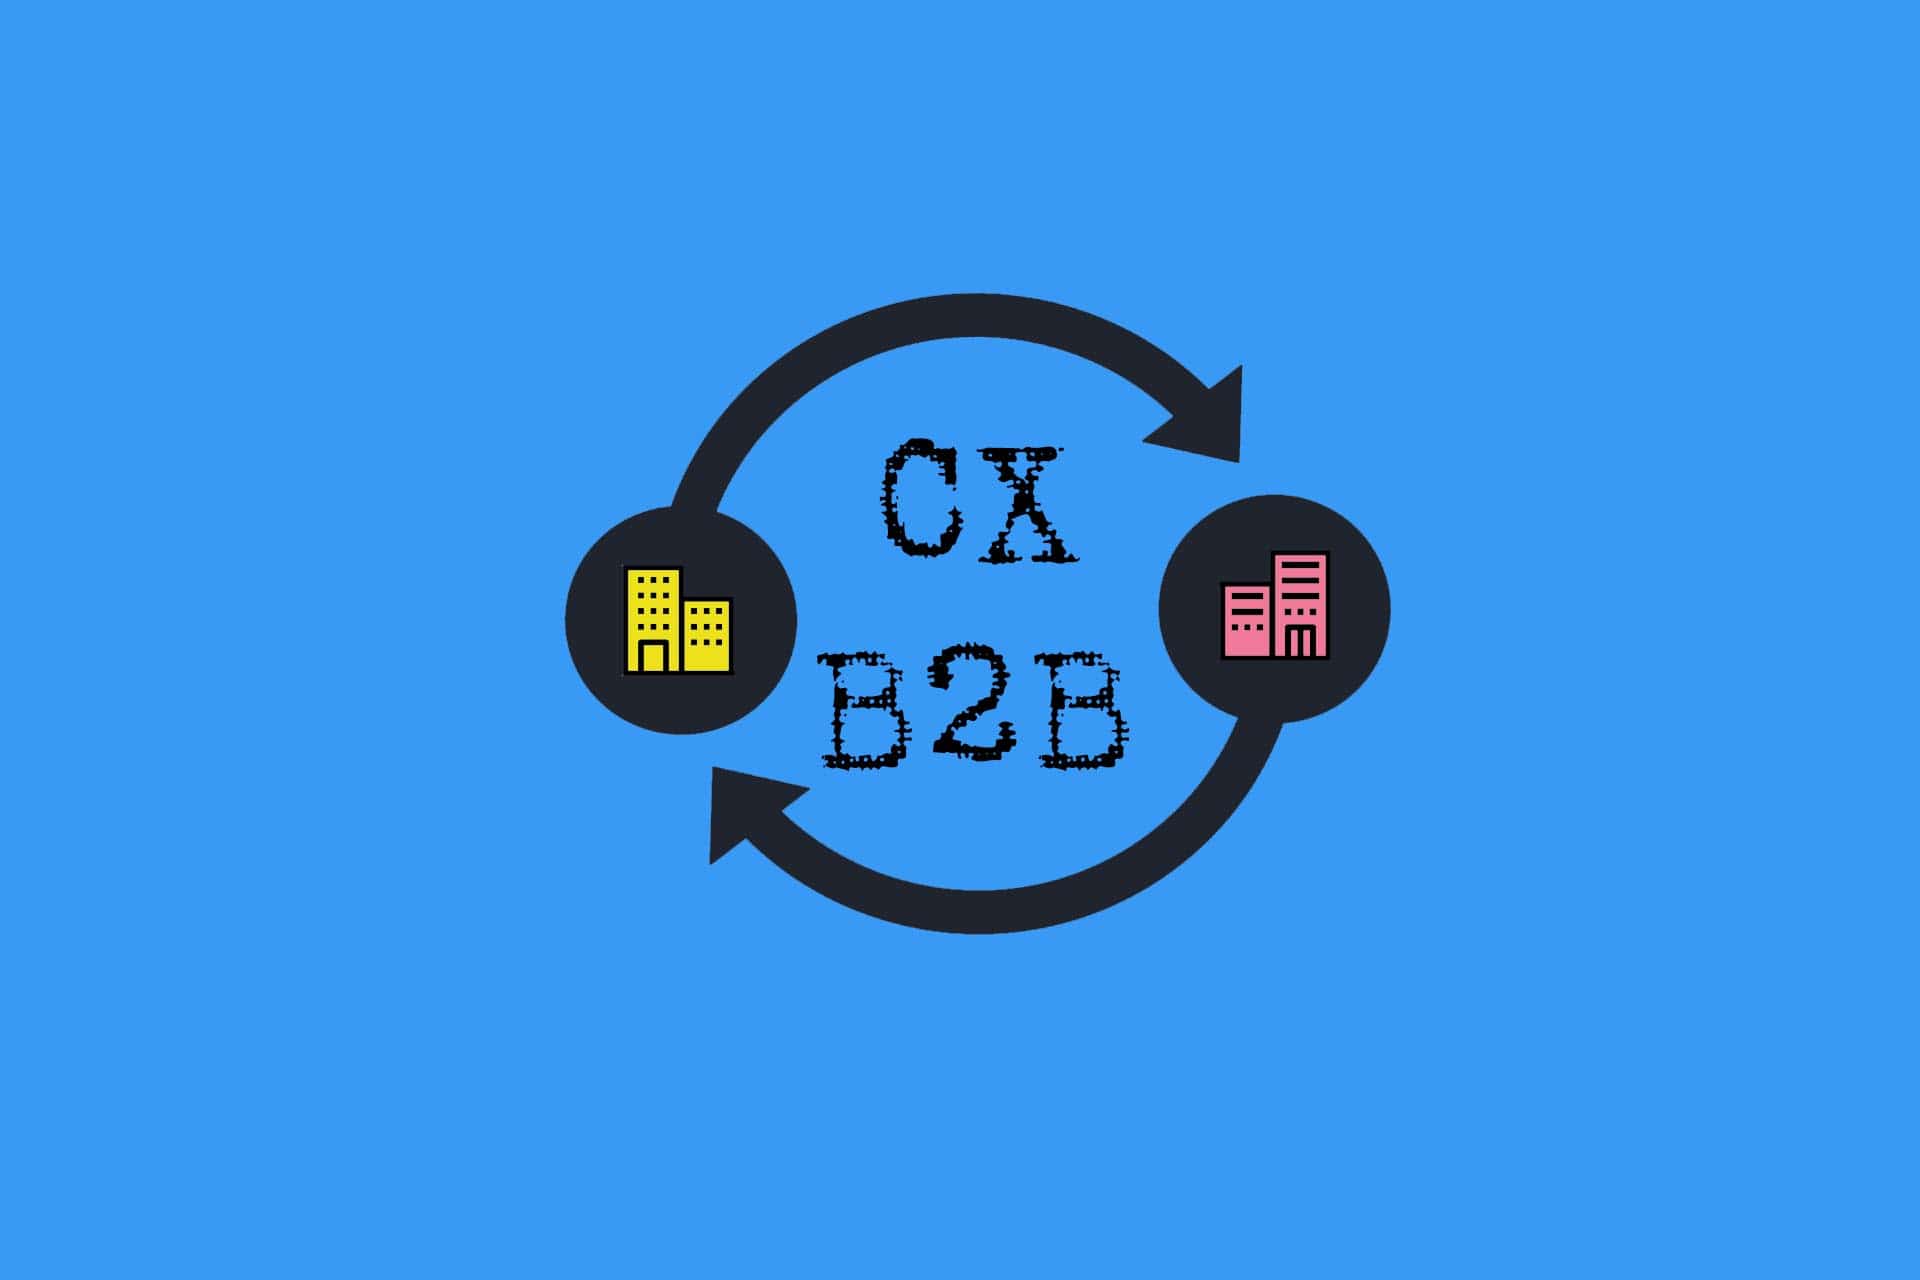 t2informatik Blog: Customer Experience in B2B – unnecessary or underestimated?